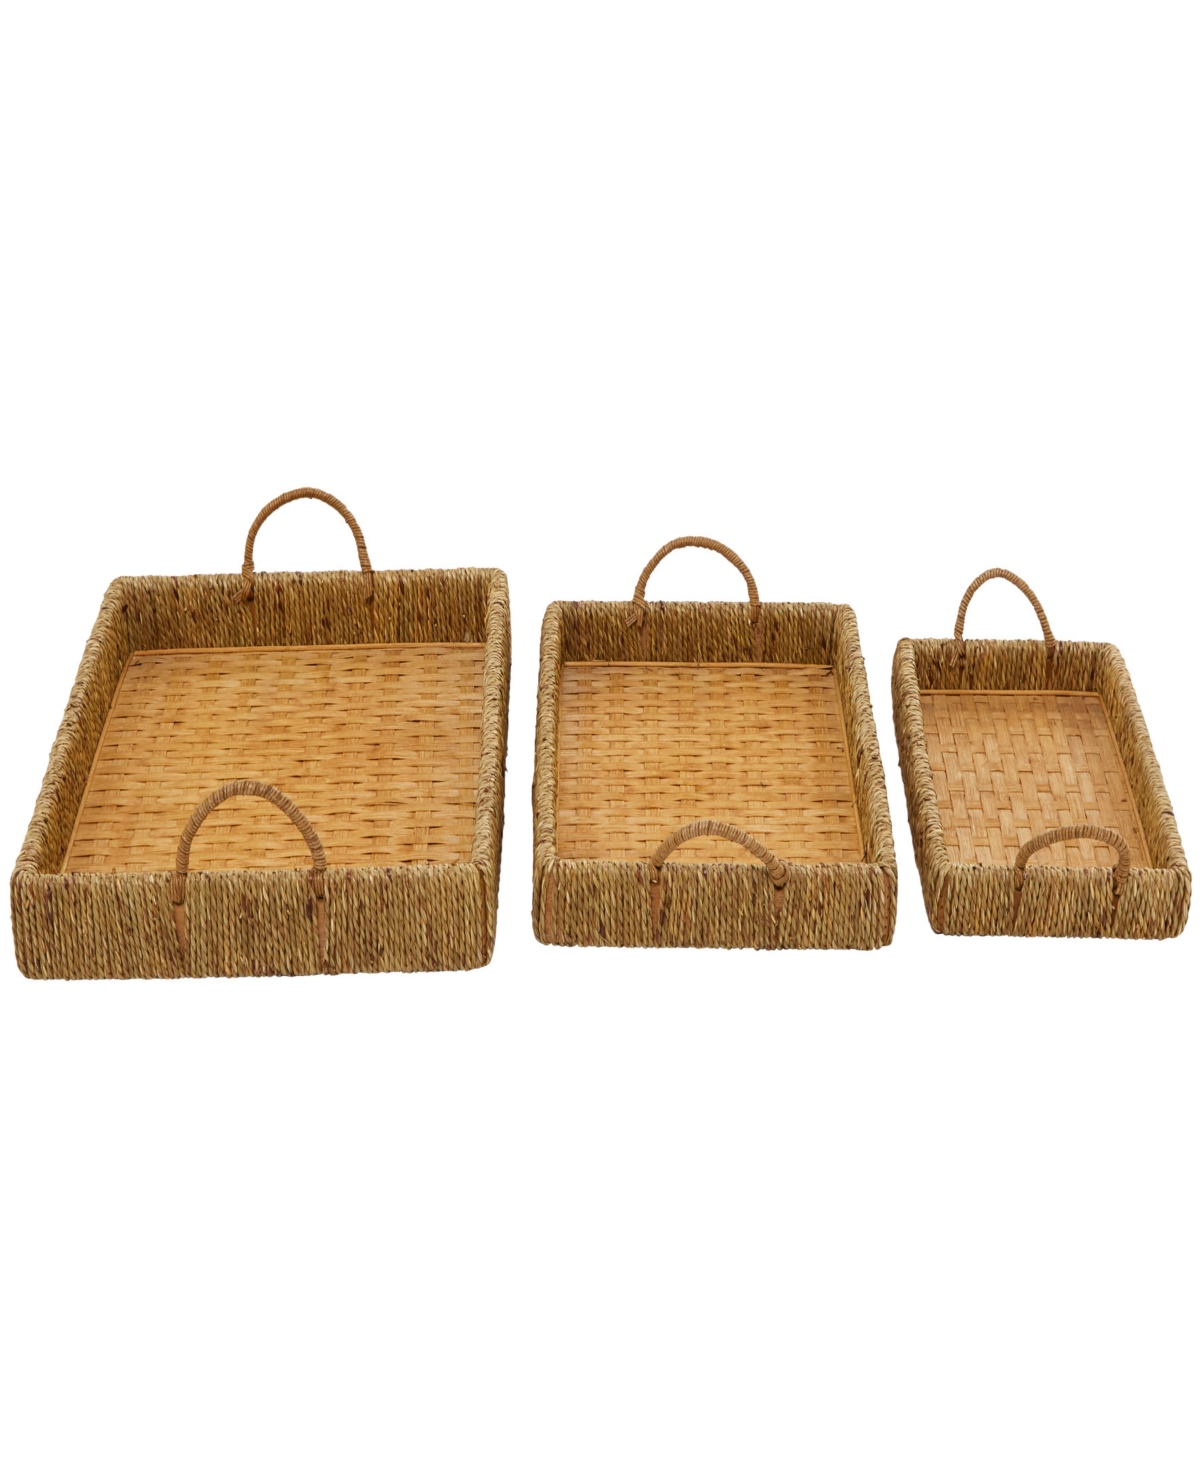 Rosemary Lane Bamboo Woven Tray With Handles, Set Of 3, 22", 20", 19" W In Brown